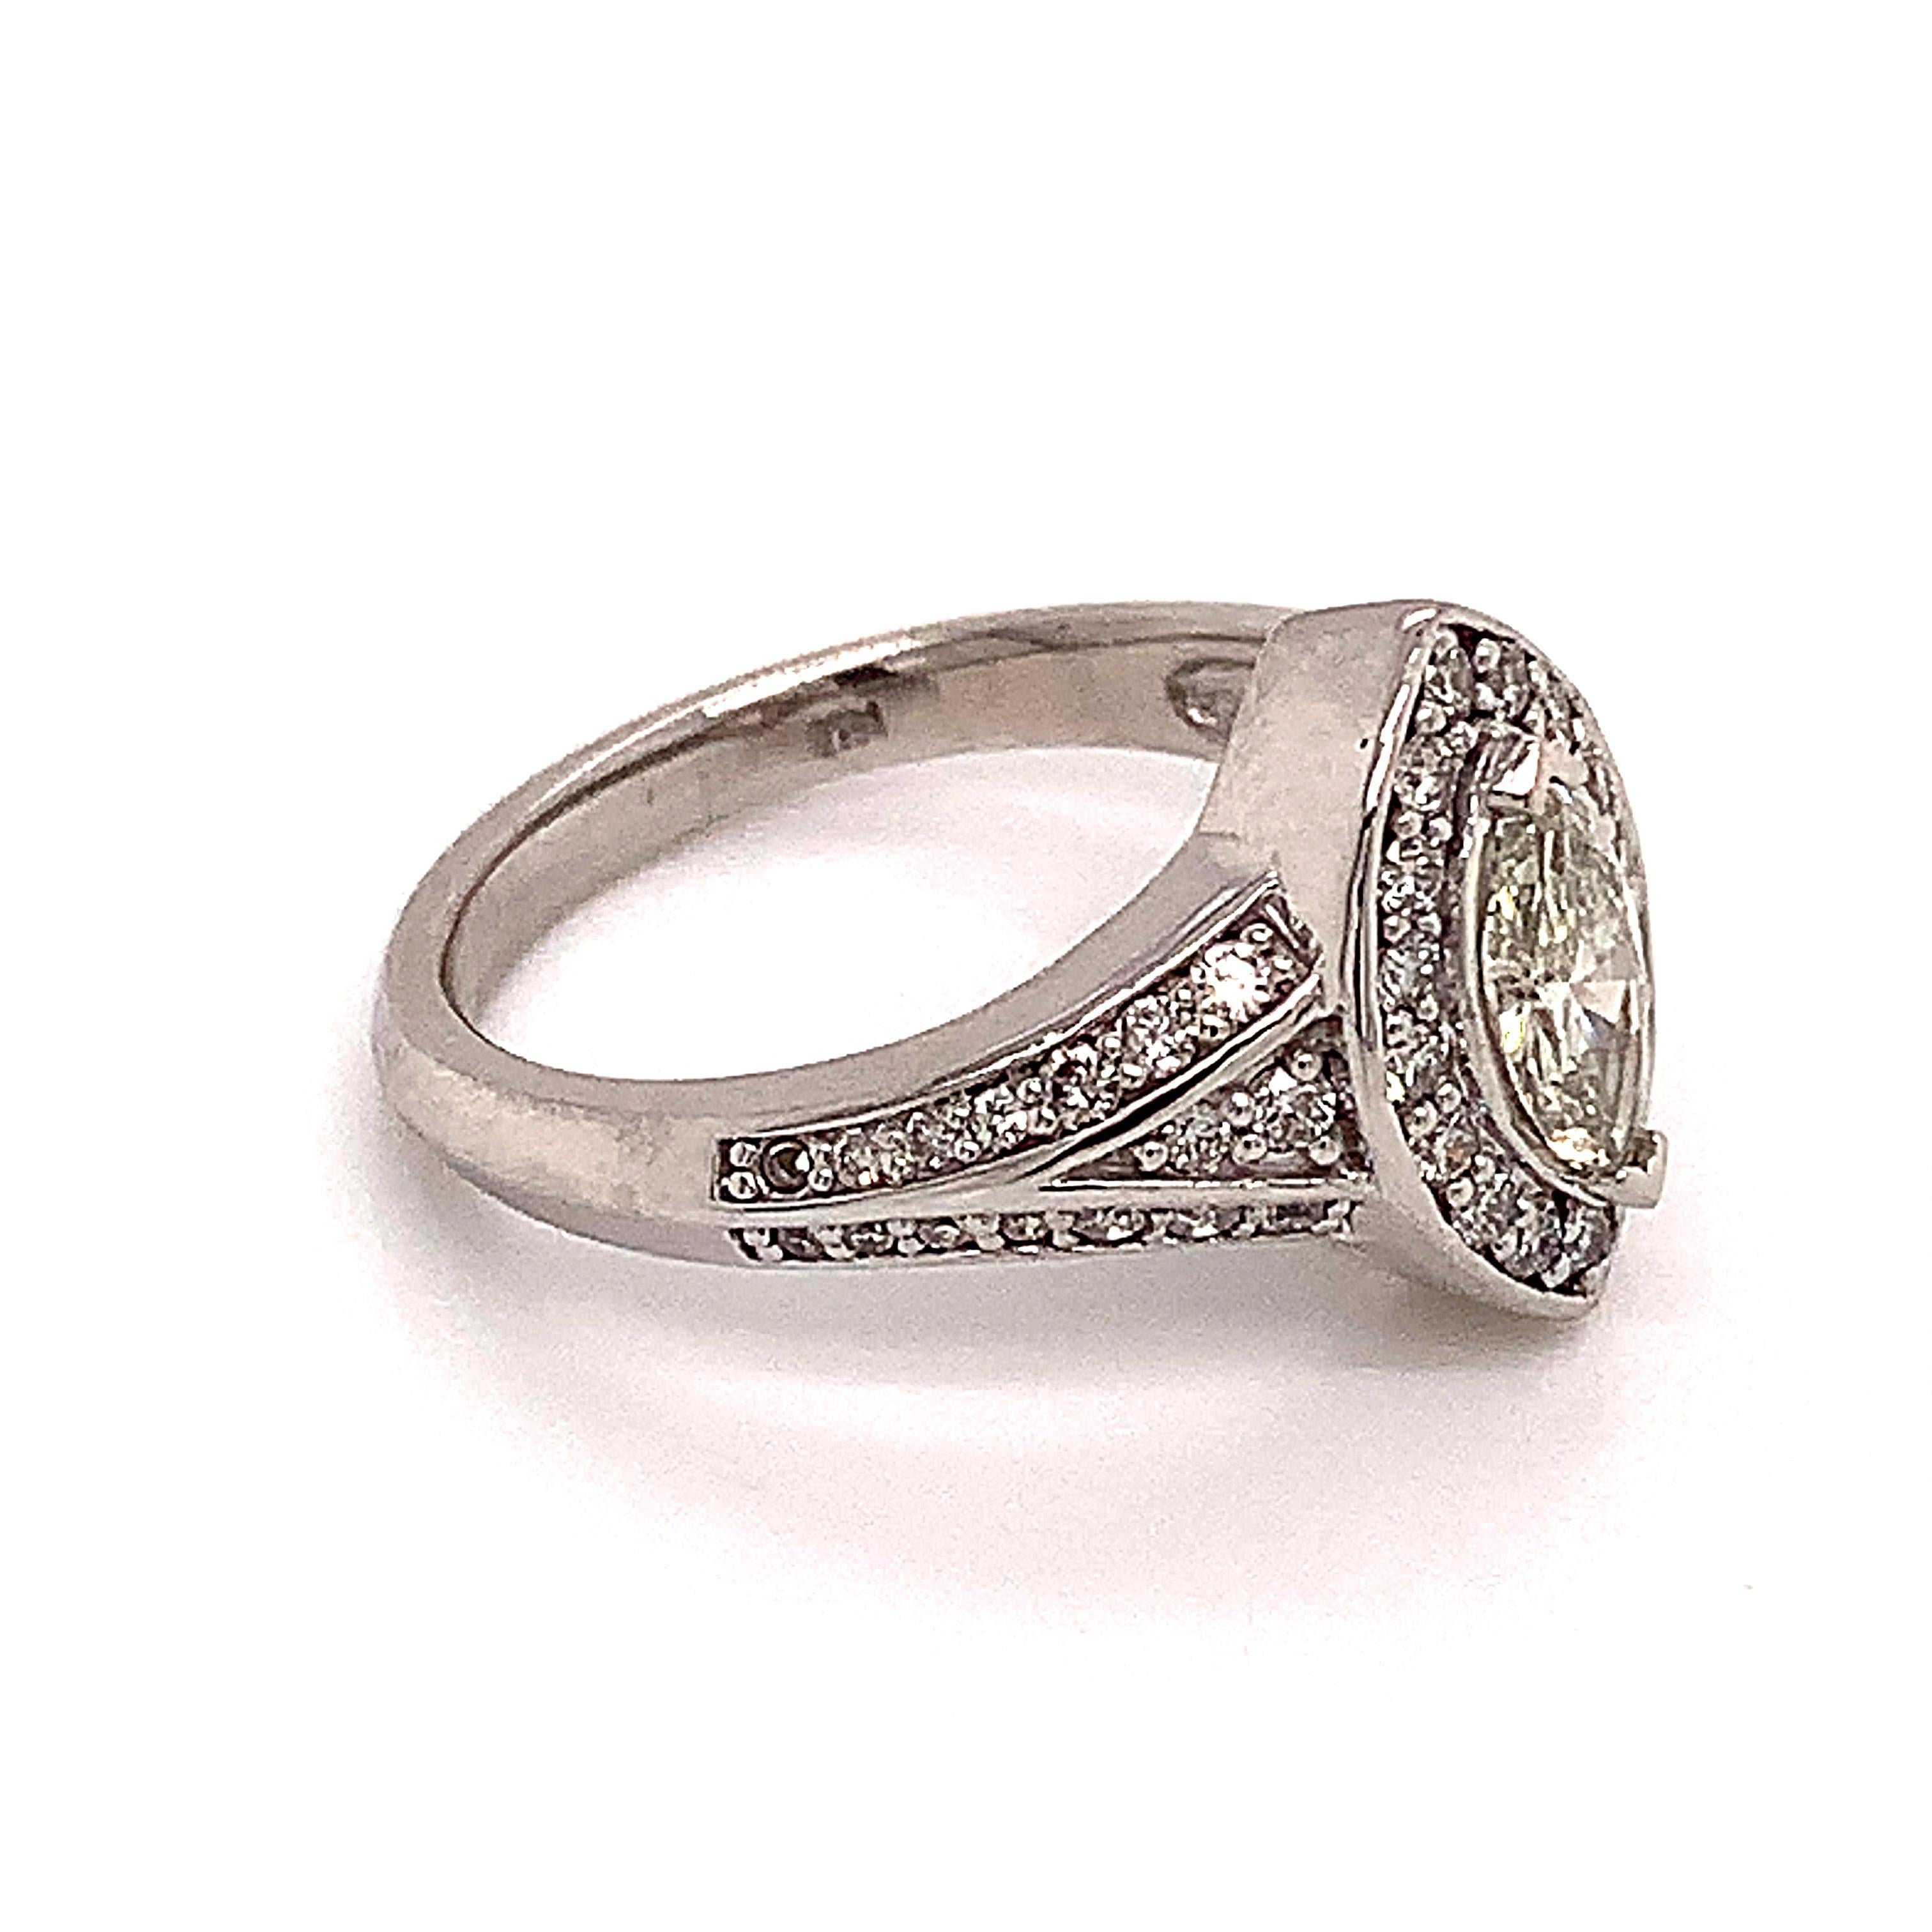 Diamond Ring 14k White Gold 0.45 TCW 4.88g Certified For Sale 6